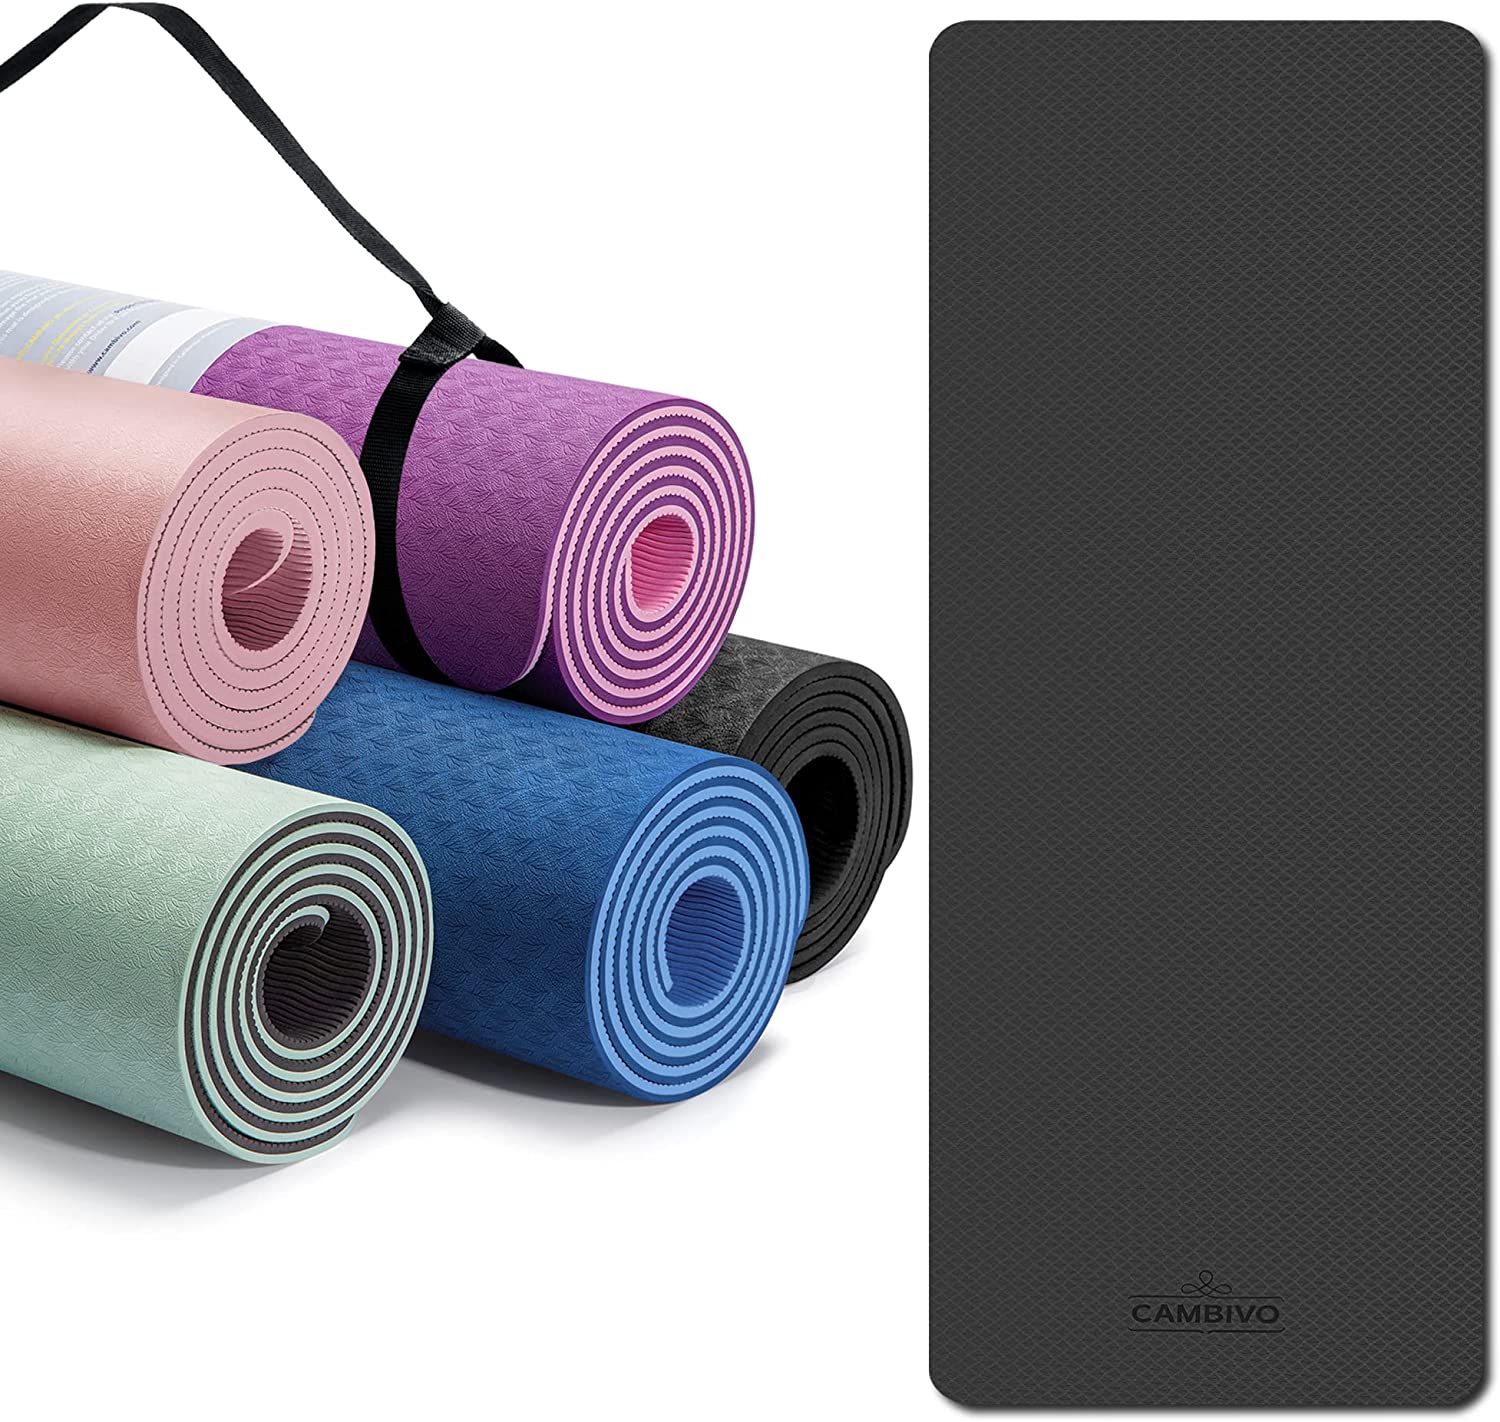  Compass Wind Rose Extra Thick Yoga Mat - Eco Friendly Non-Slip  Exercise & Fitness Mat Workout Mat for All Type of Yoga, Pilates and Floor Exercises  72x24in : Everything Else